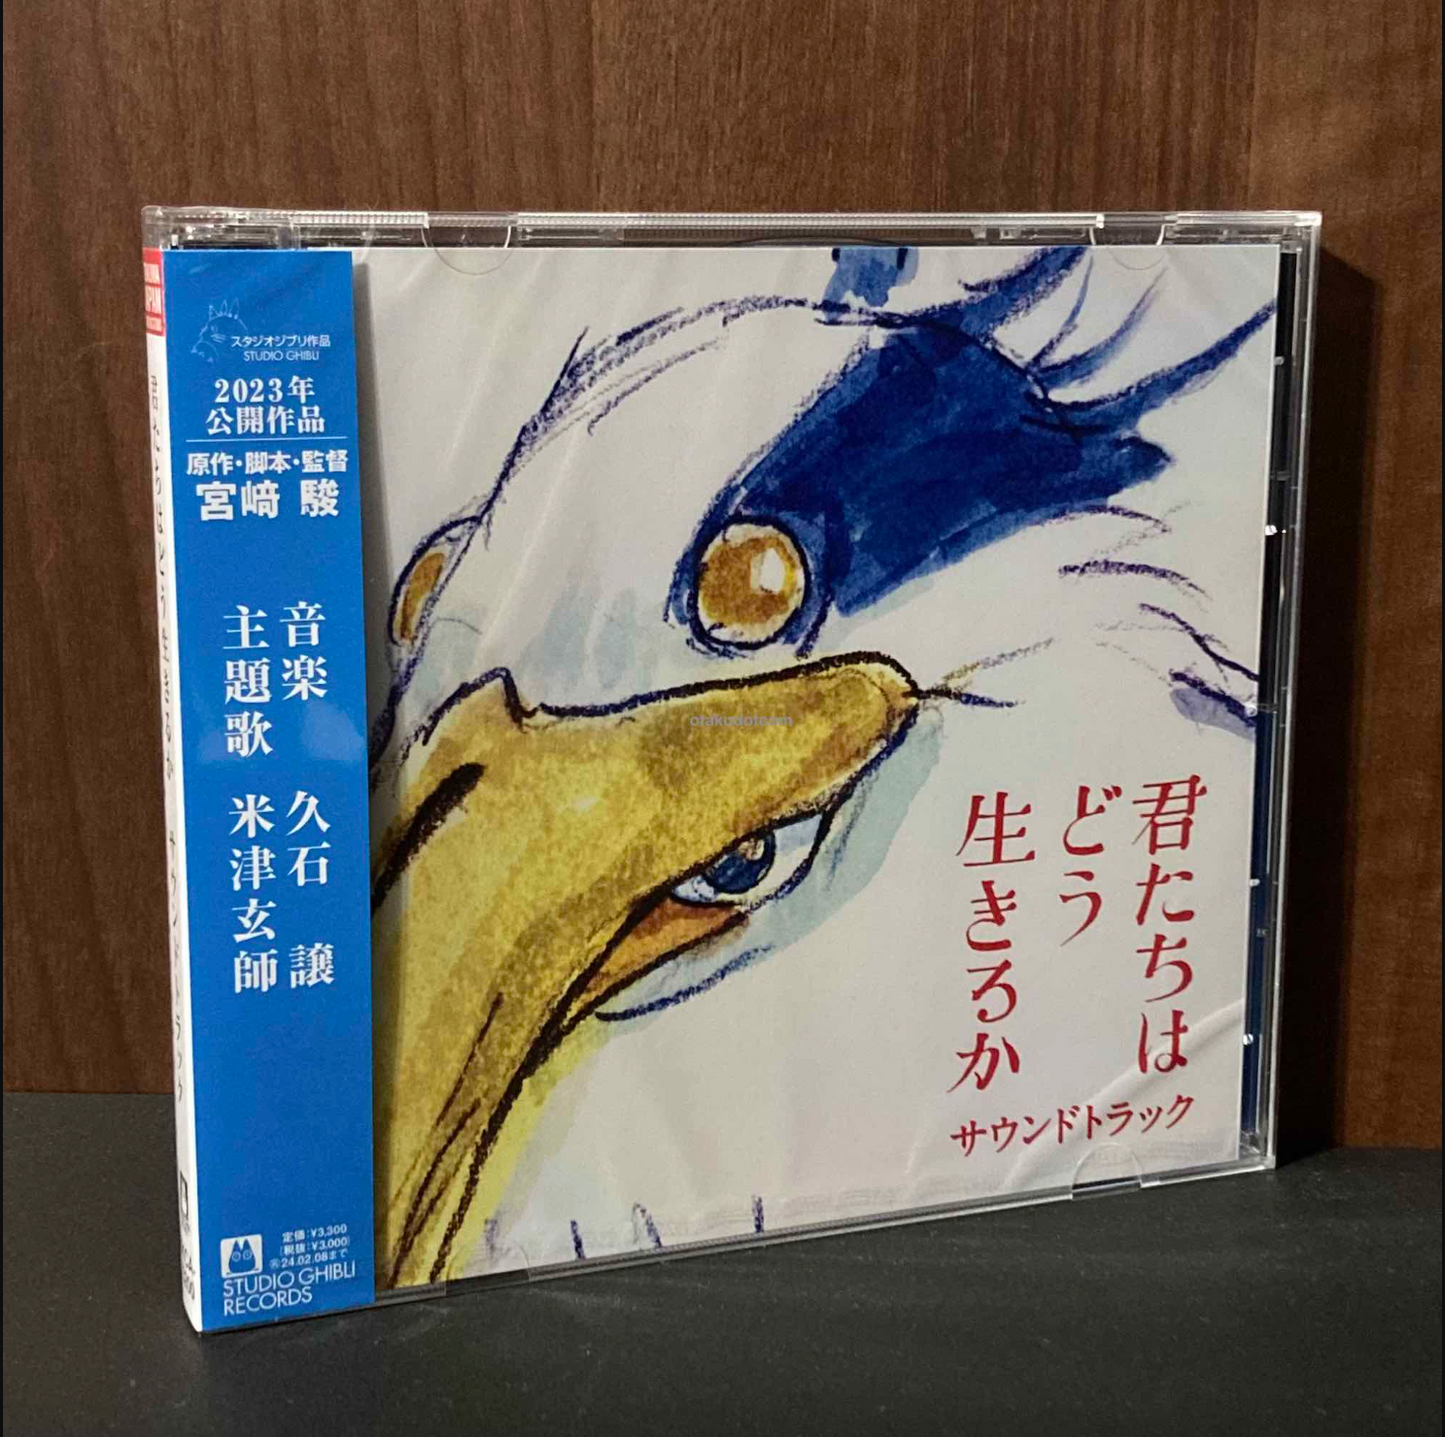 The Boy and the Heron Soundtrack CD